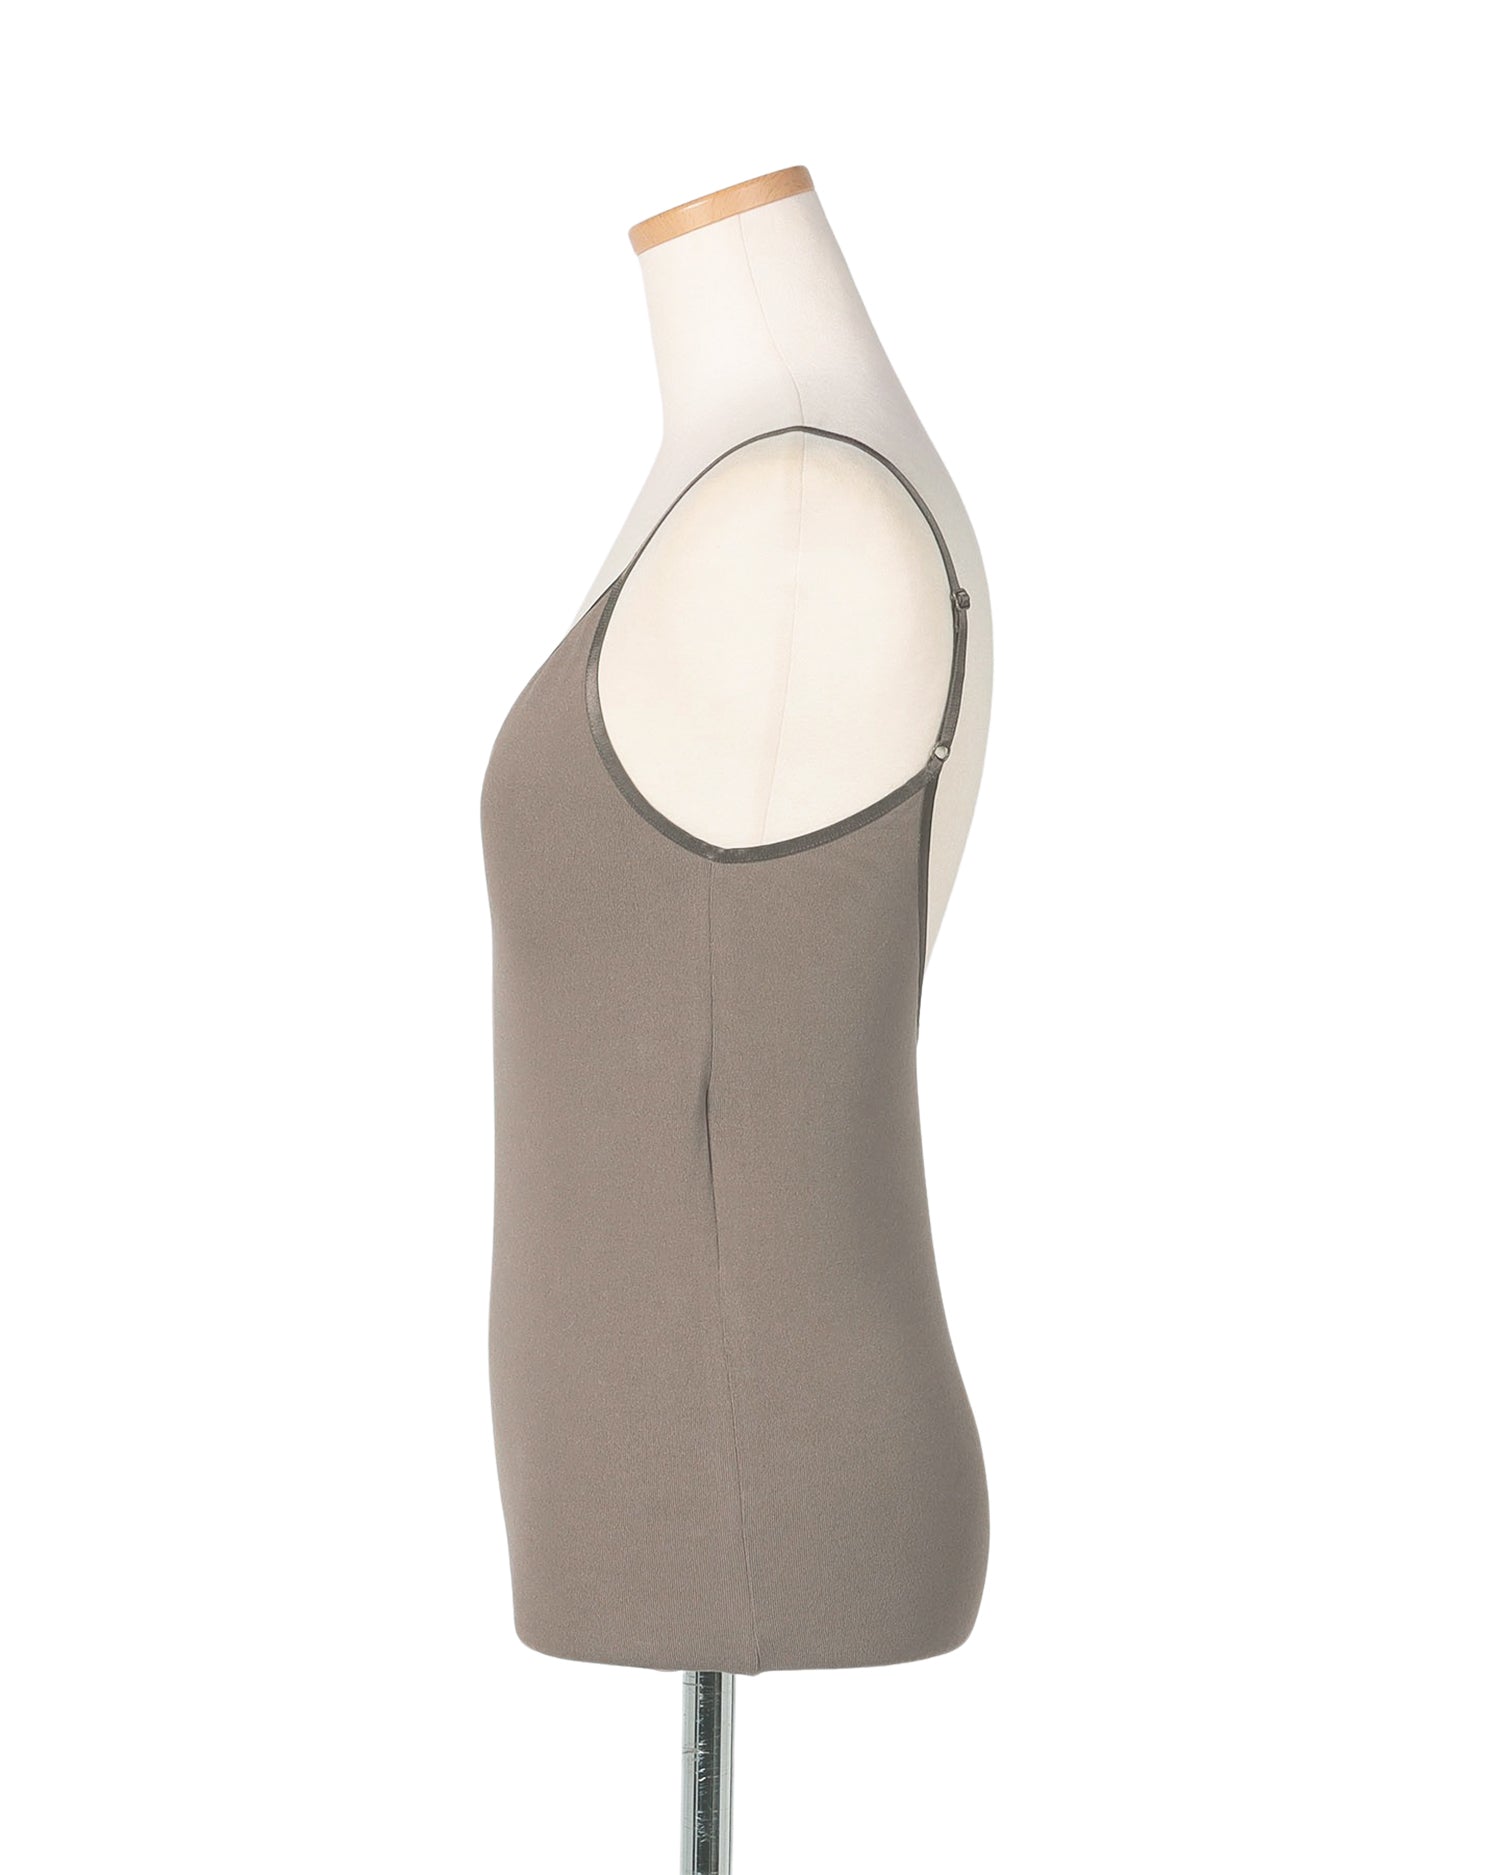 [Pre-order] UNDERSON UNDERSON for AMARC Open back camisole with cup &lt;br&gt; COLOR: Mocha